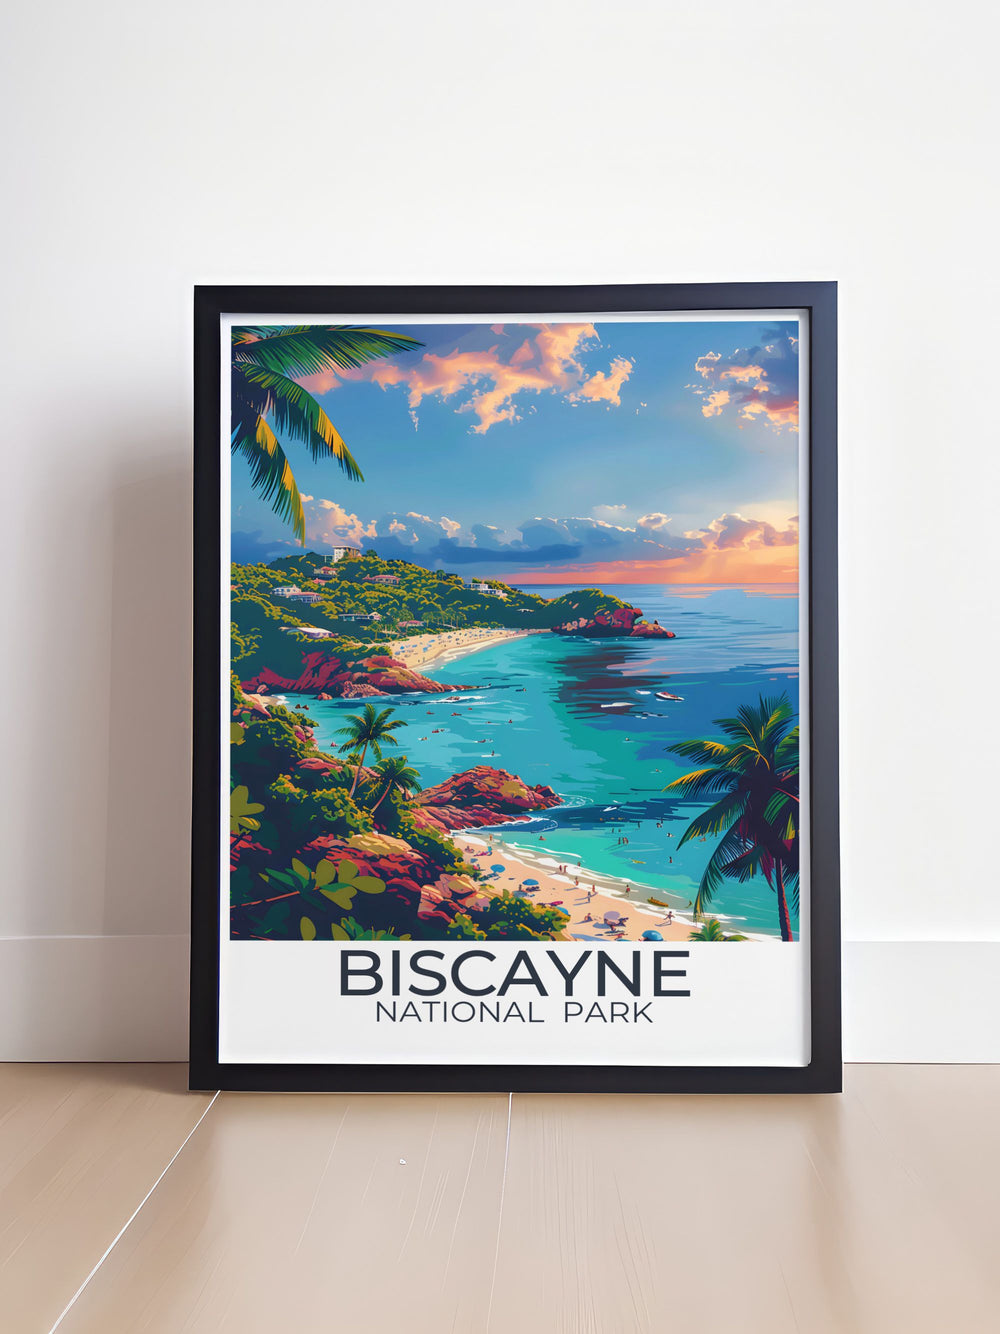 Unique artwork of Biscayne National Park featuring Elliot Key Trail and coral reefs, perfect for personalized gifts or home decor. This print captures the essence of Floridas most scenic national park.